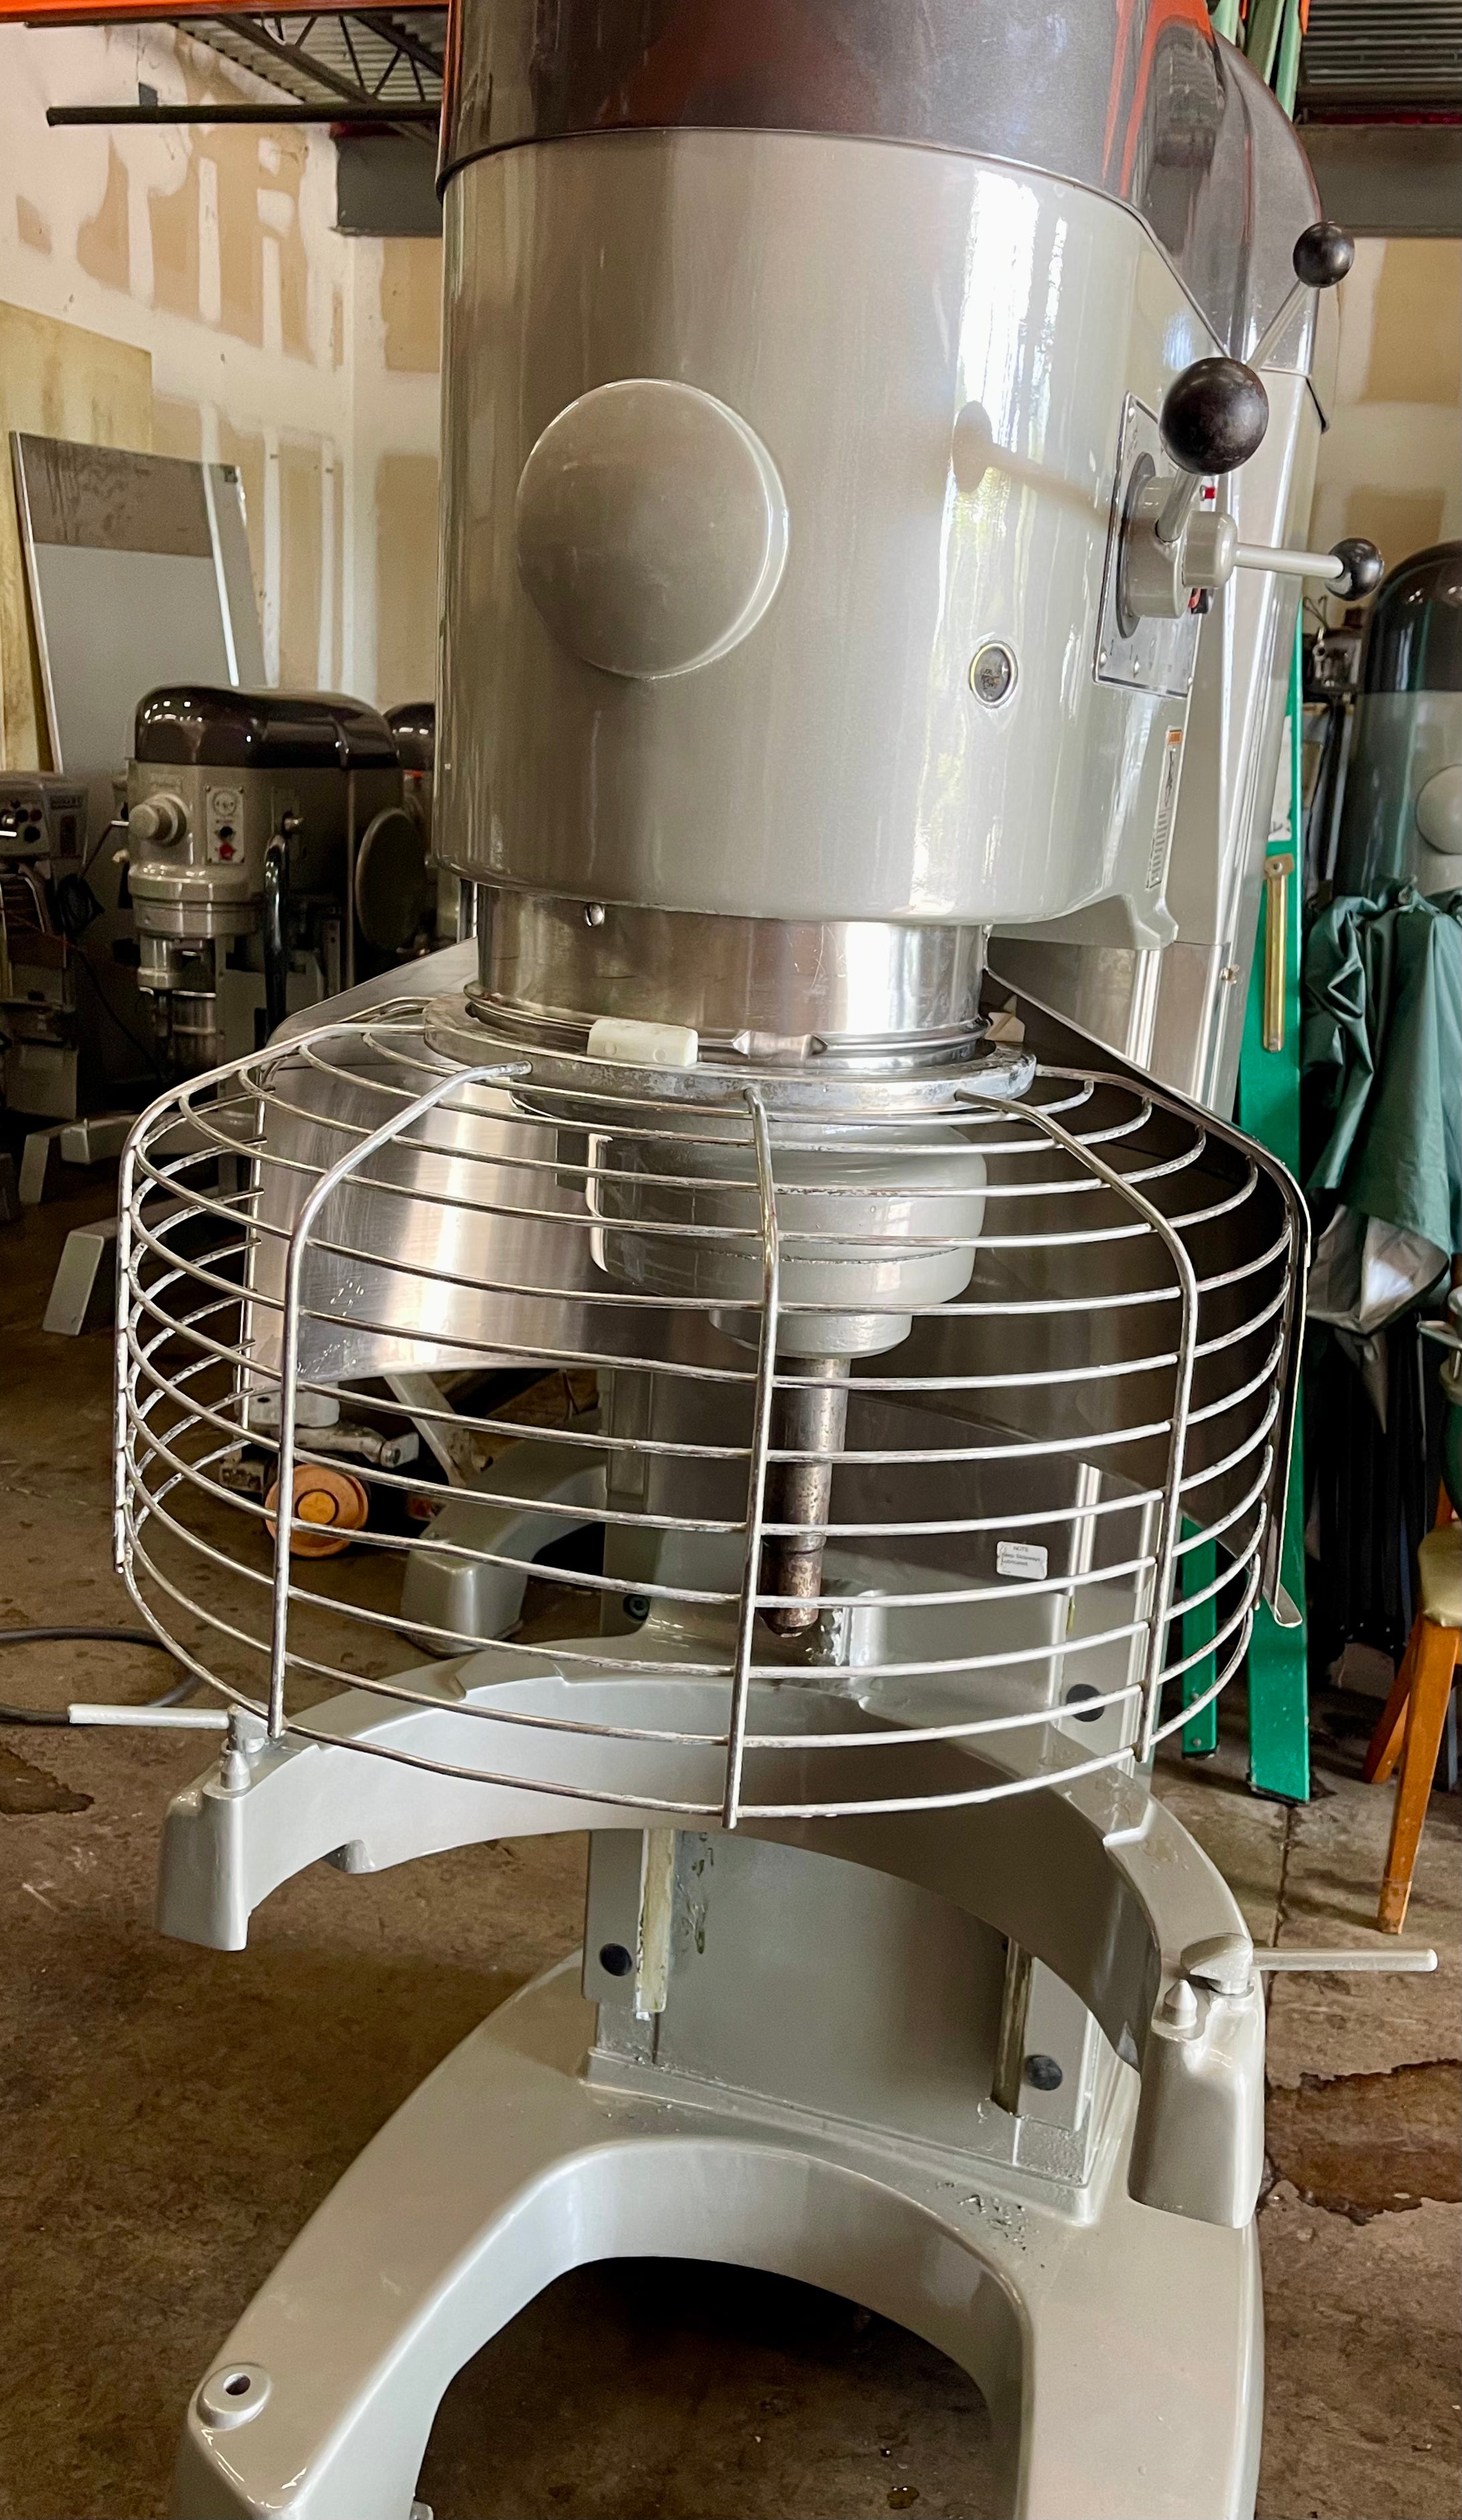 Hobart V1401 140 quart mixer. Comes with stainless steel bowl and 1 attachment